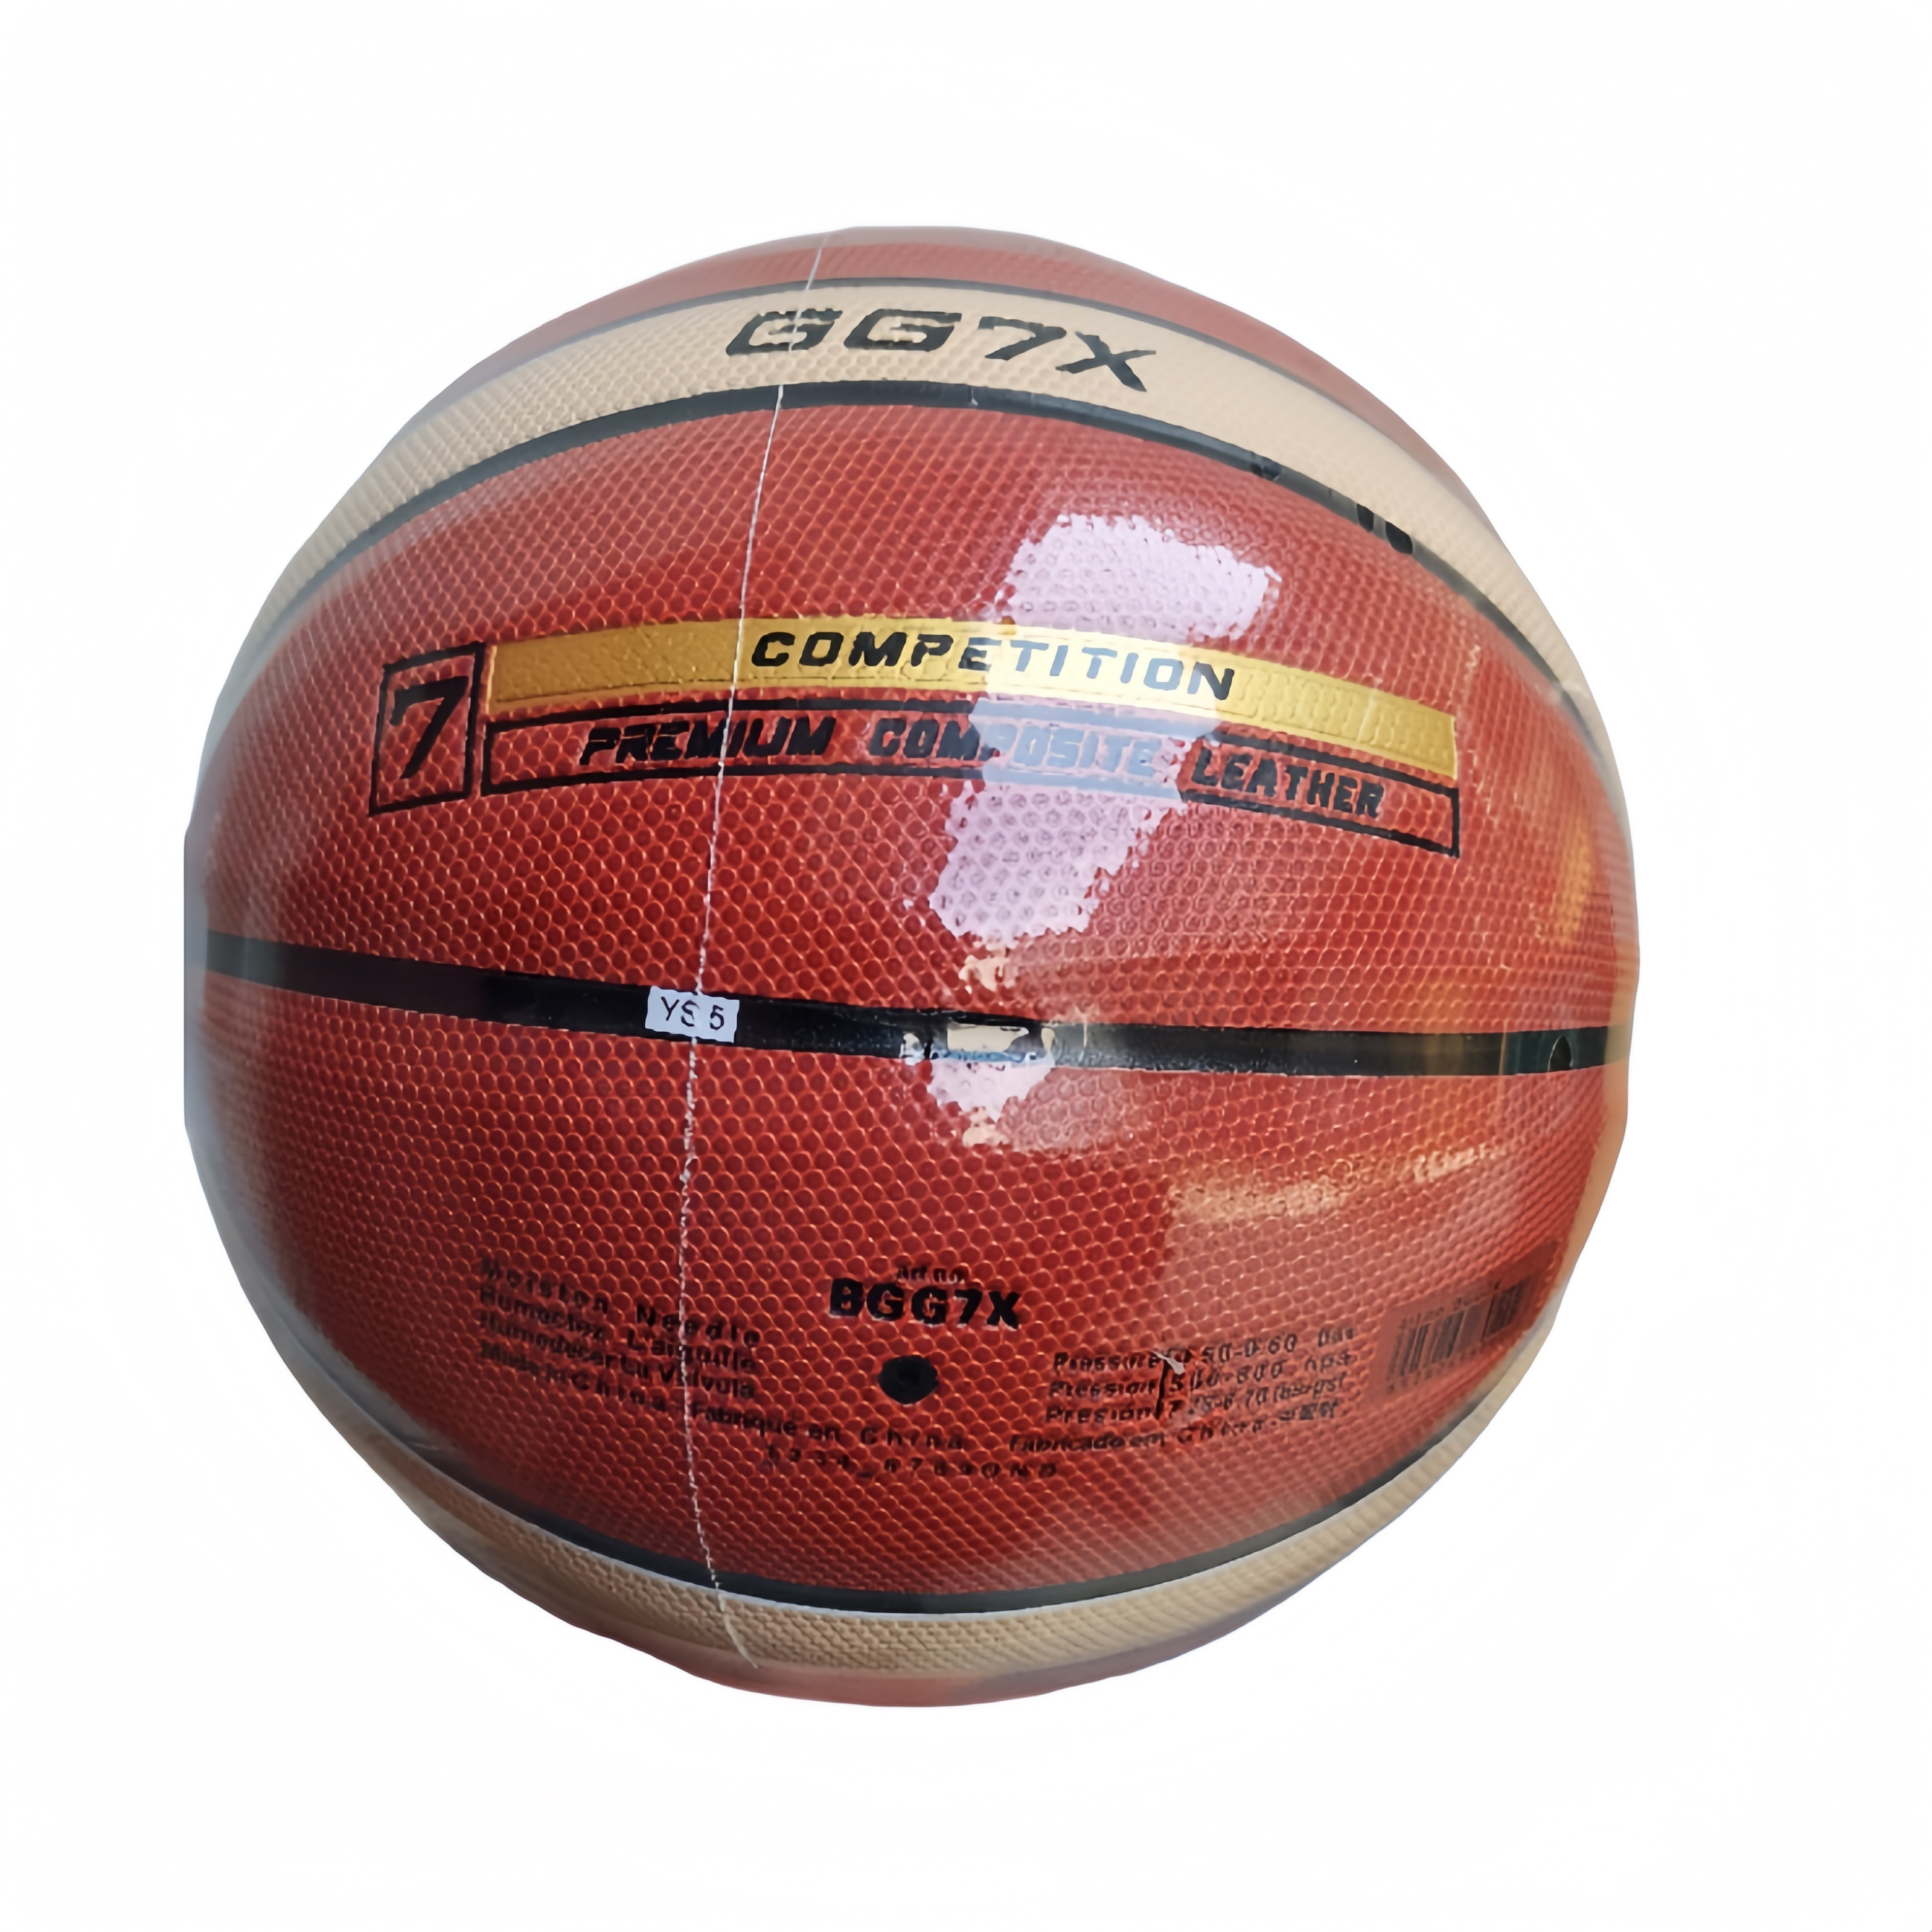 

1pc, Durable Basketball, Gg7x Official Size 7/6/5 Pu Leather Basketball For Outdoor Indoor Match Training